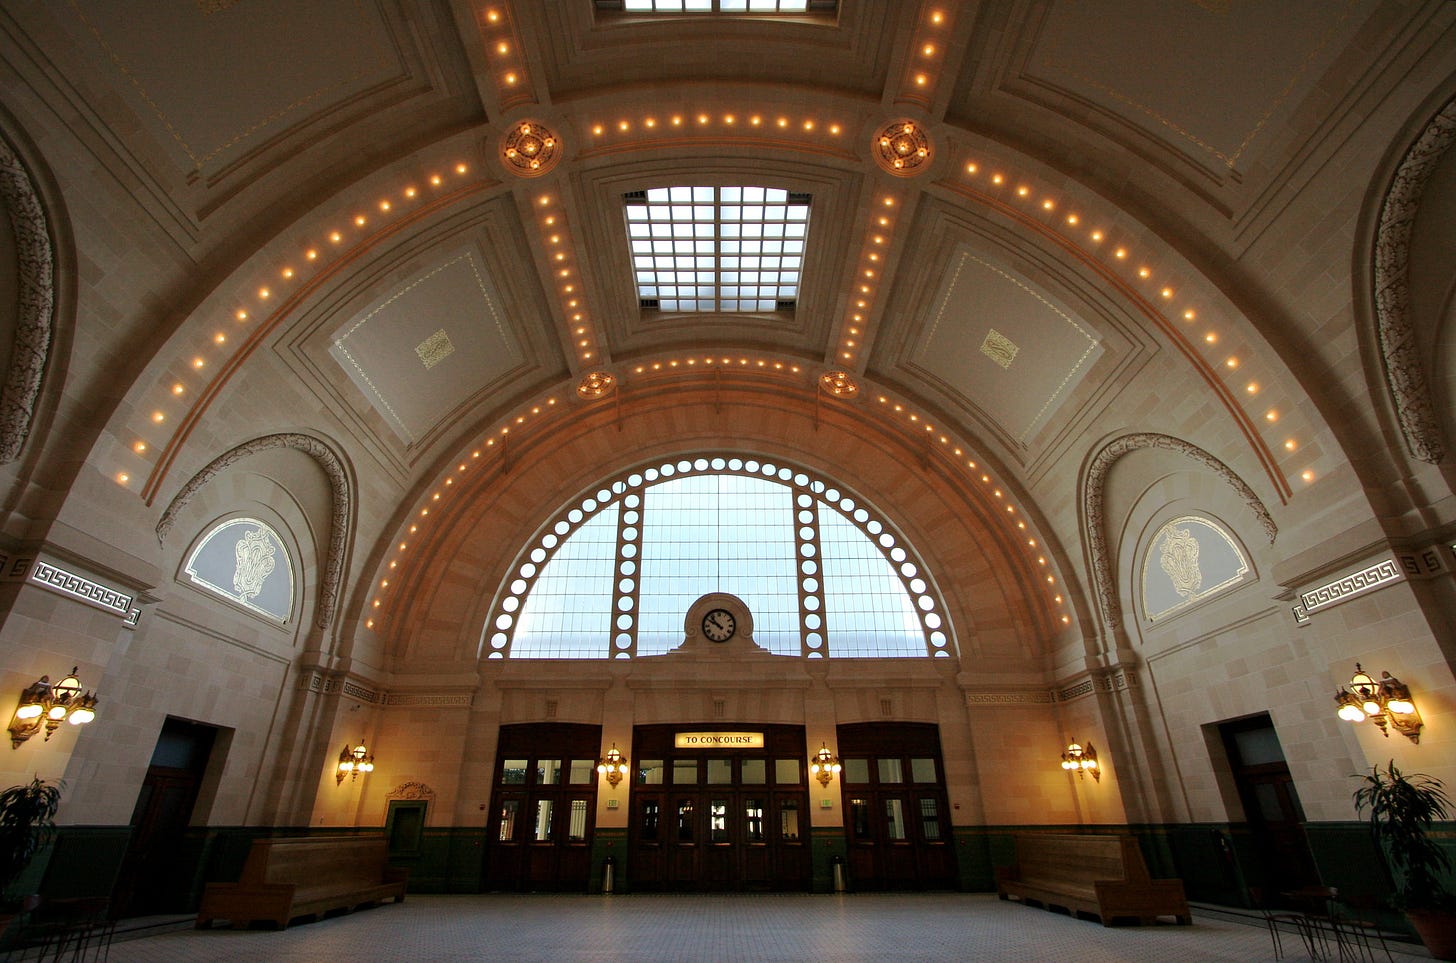 Interior shot of King Street Train Station in Seattle directed toward the ornate ceiling architecture.